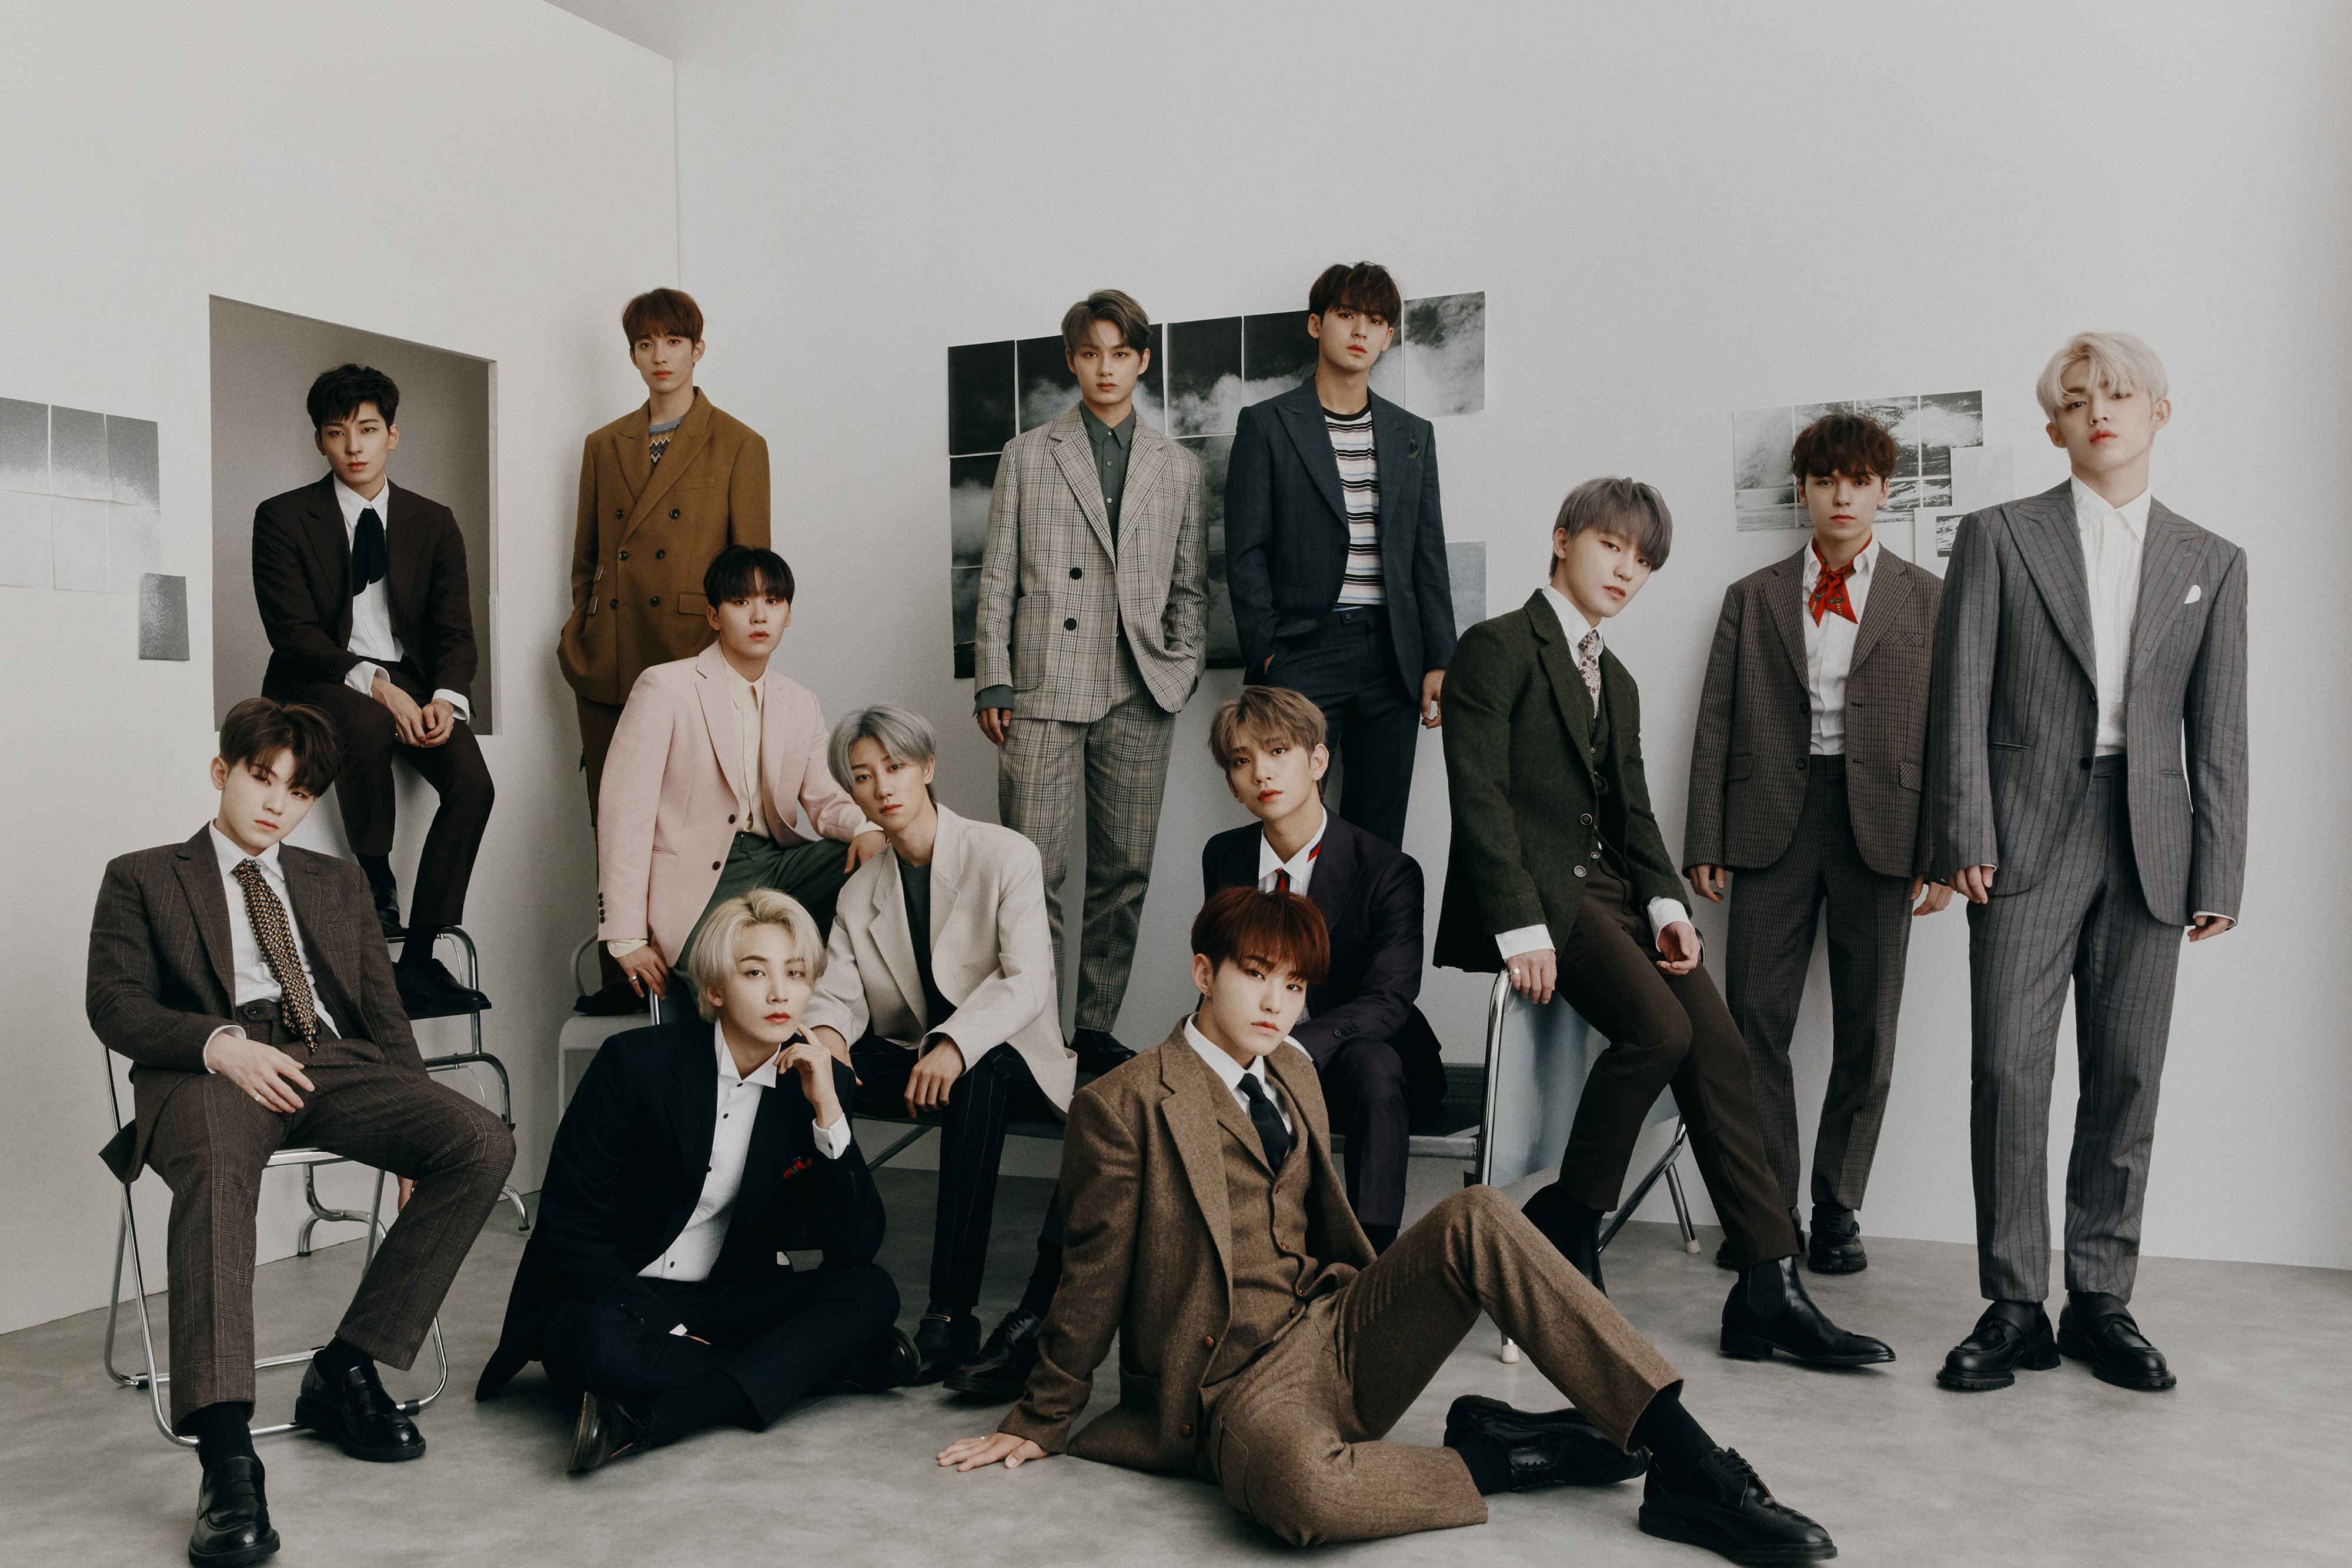 HD desktop wallpaper featuring a group of stylish individuals posing in a modern setting, perfect for fans of Seventeen.